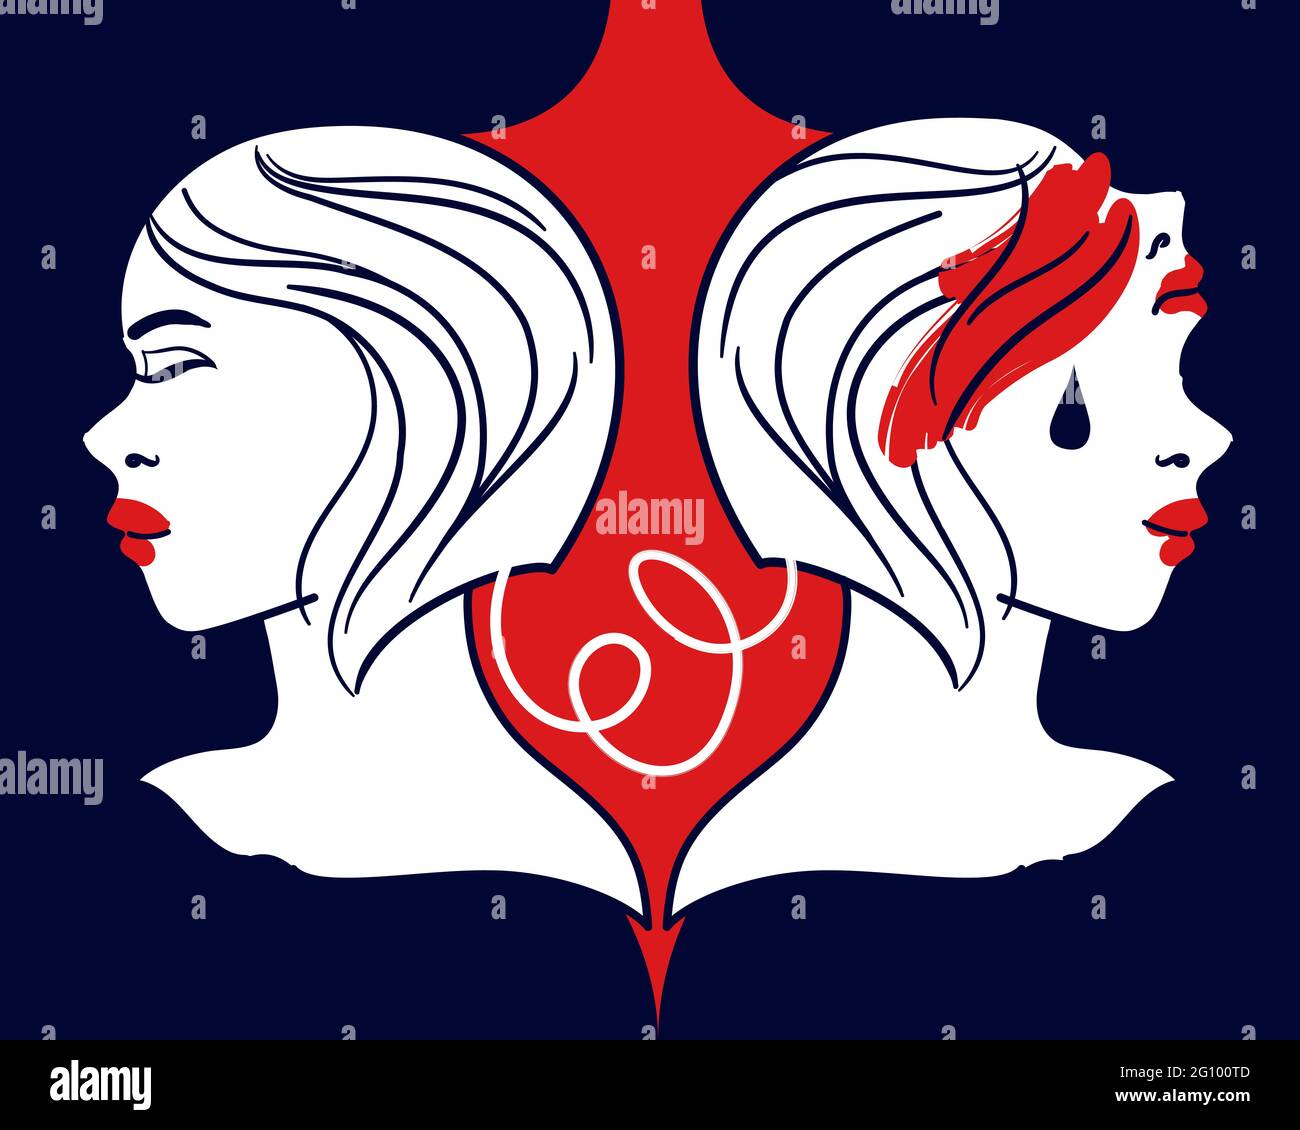 Portrait of woman with bipolar disorder. Happy and depressed faces - surreal metaphor. Female mental health - elegant line art, red accents Stock Vector